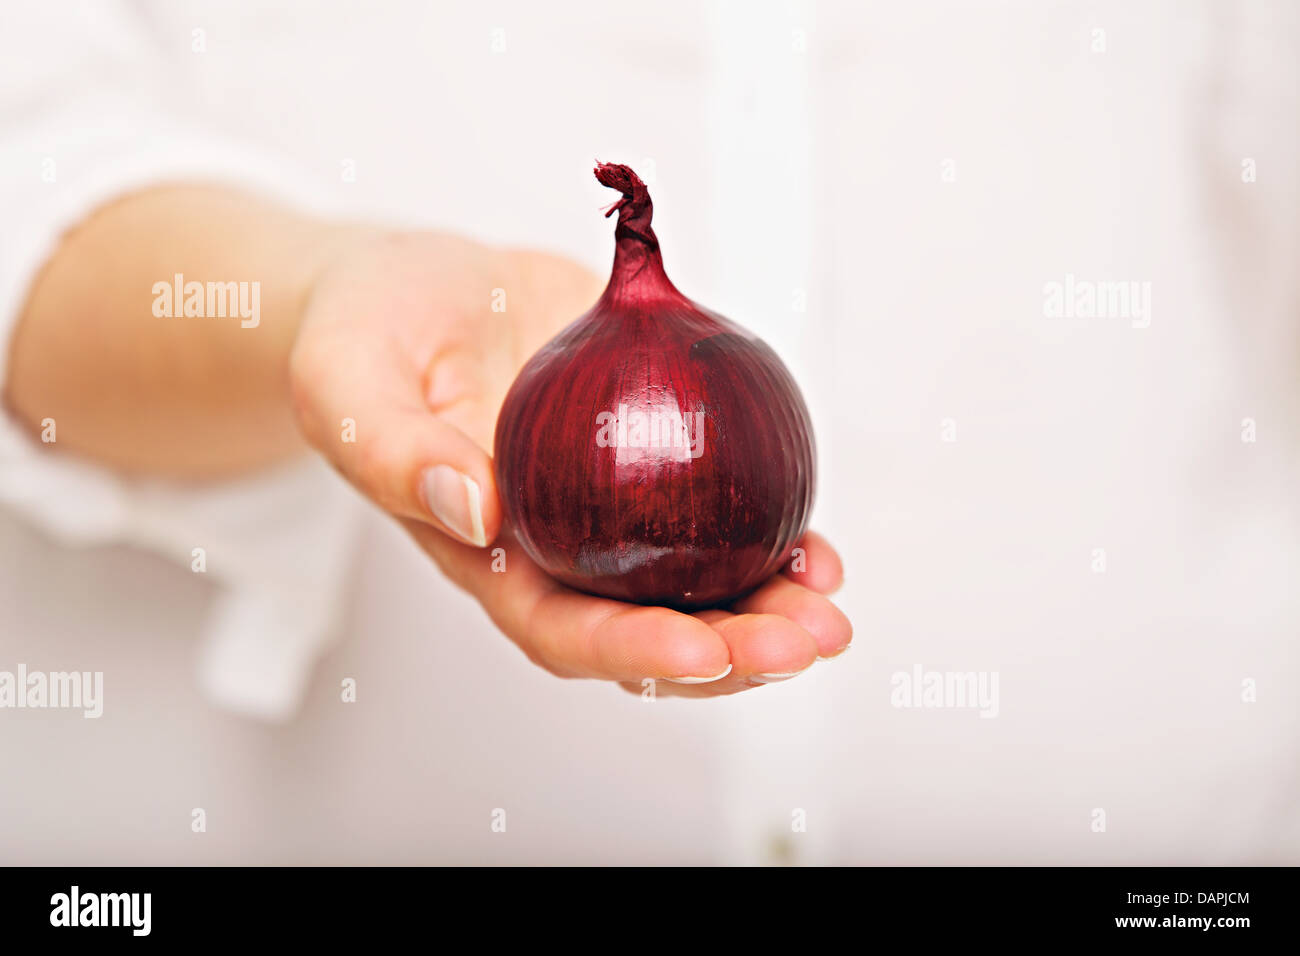 Woman's one hand holding a large glossy onion Stock Photo